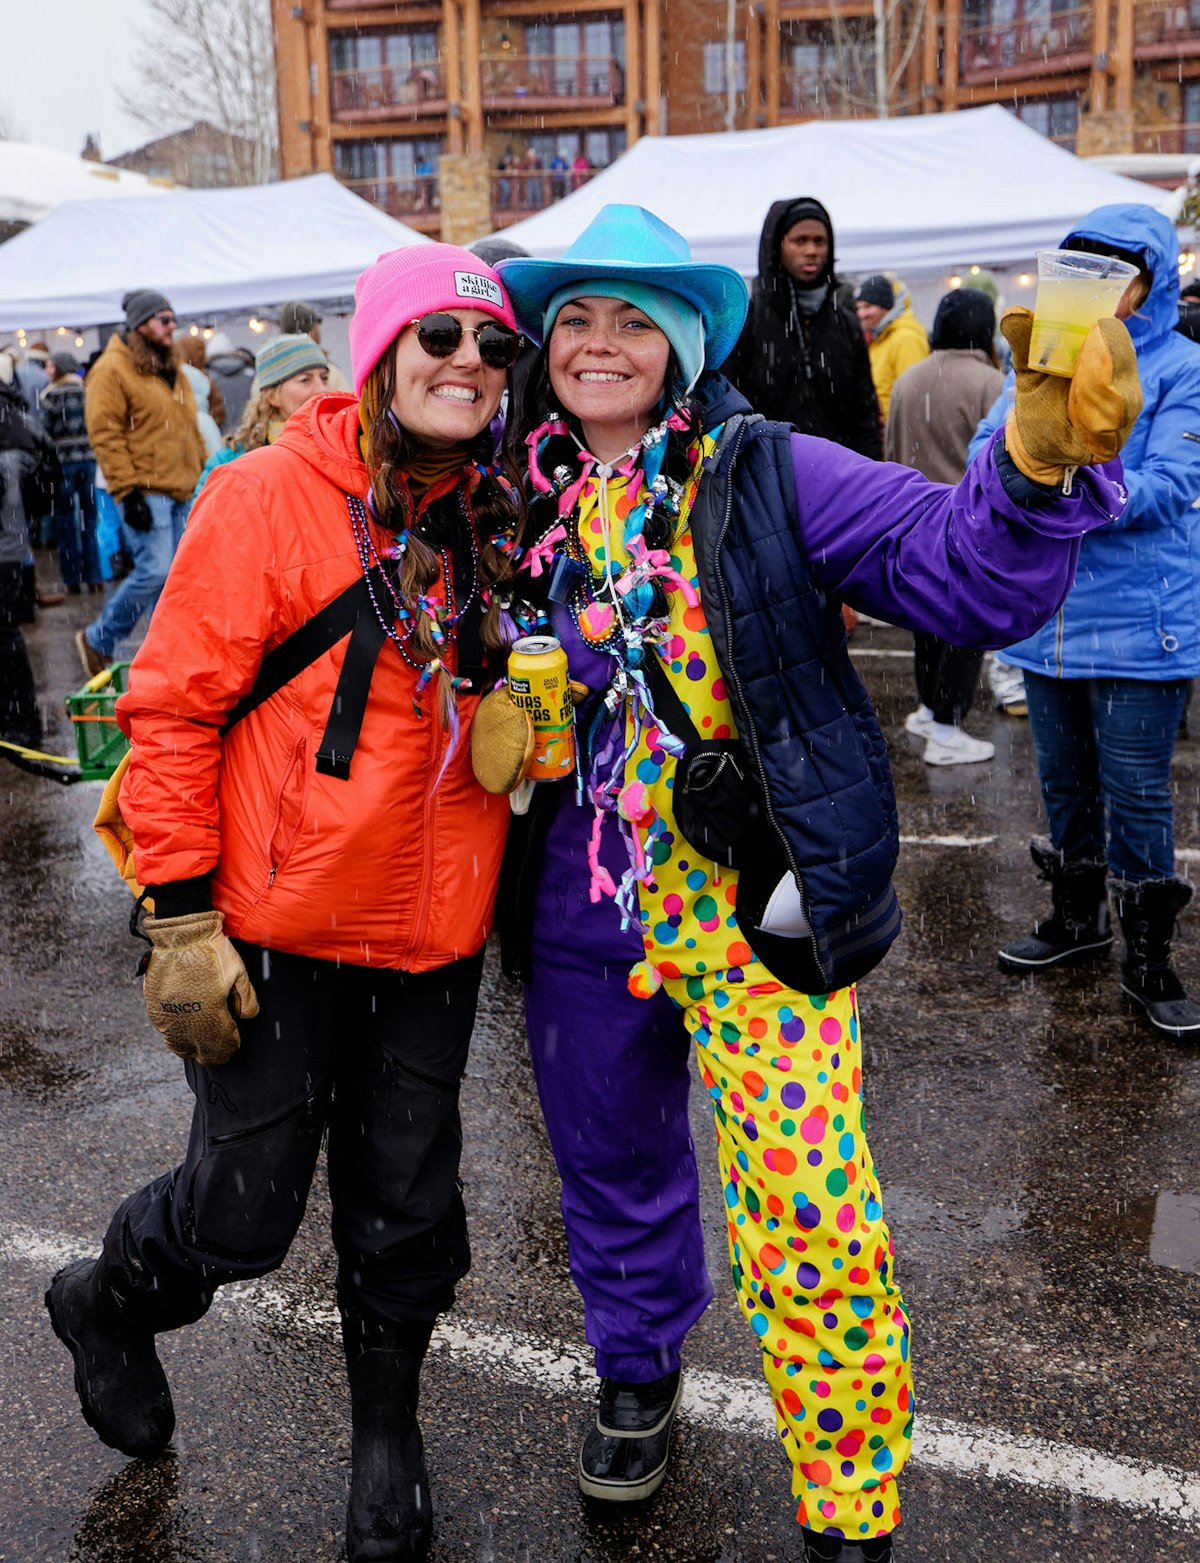 Woman in colorful costume at Rendezvous Spring Festival